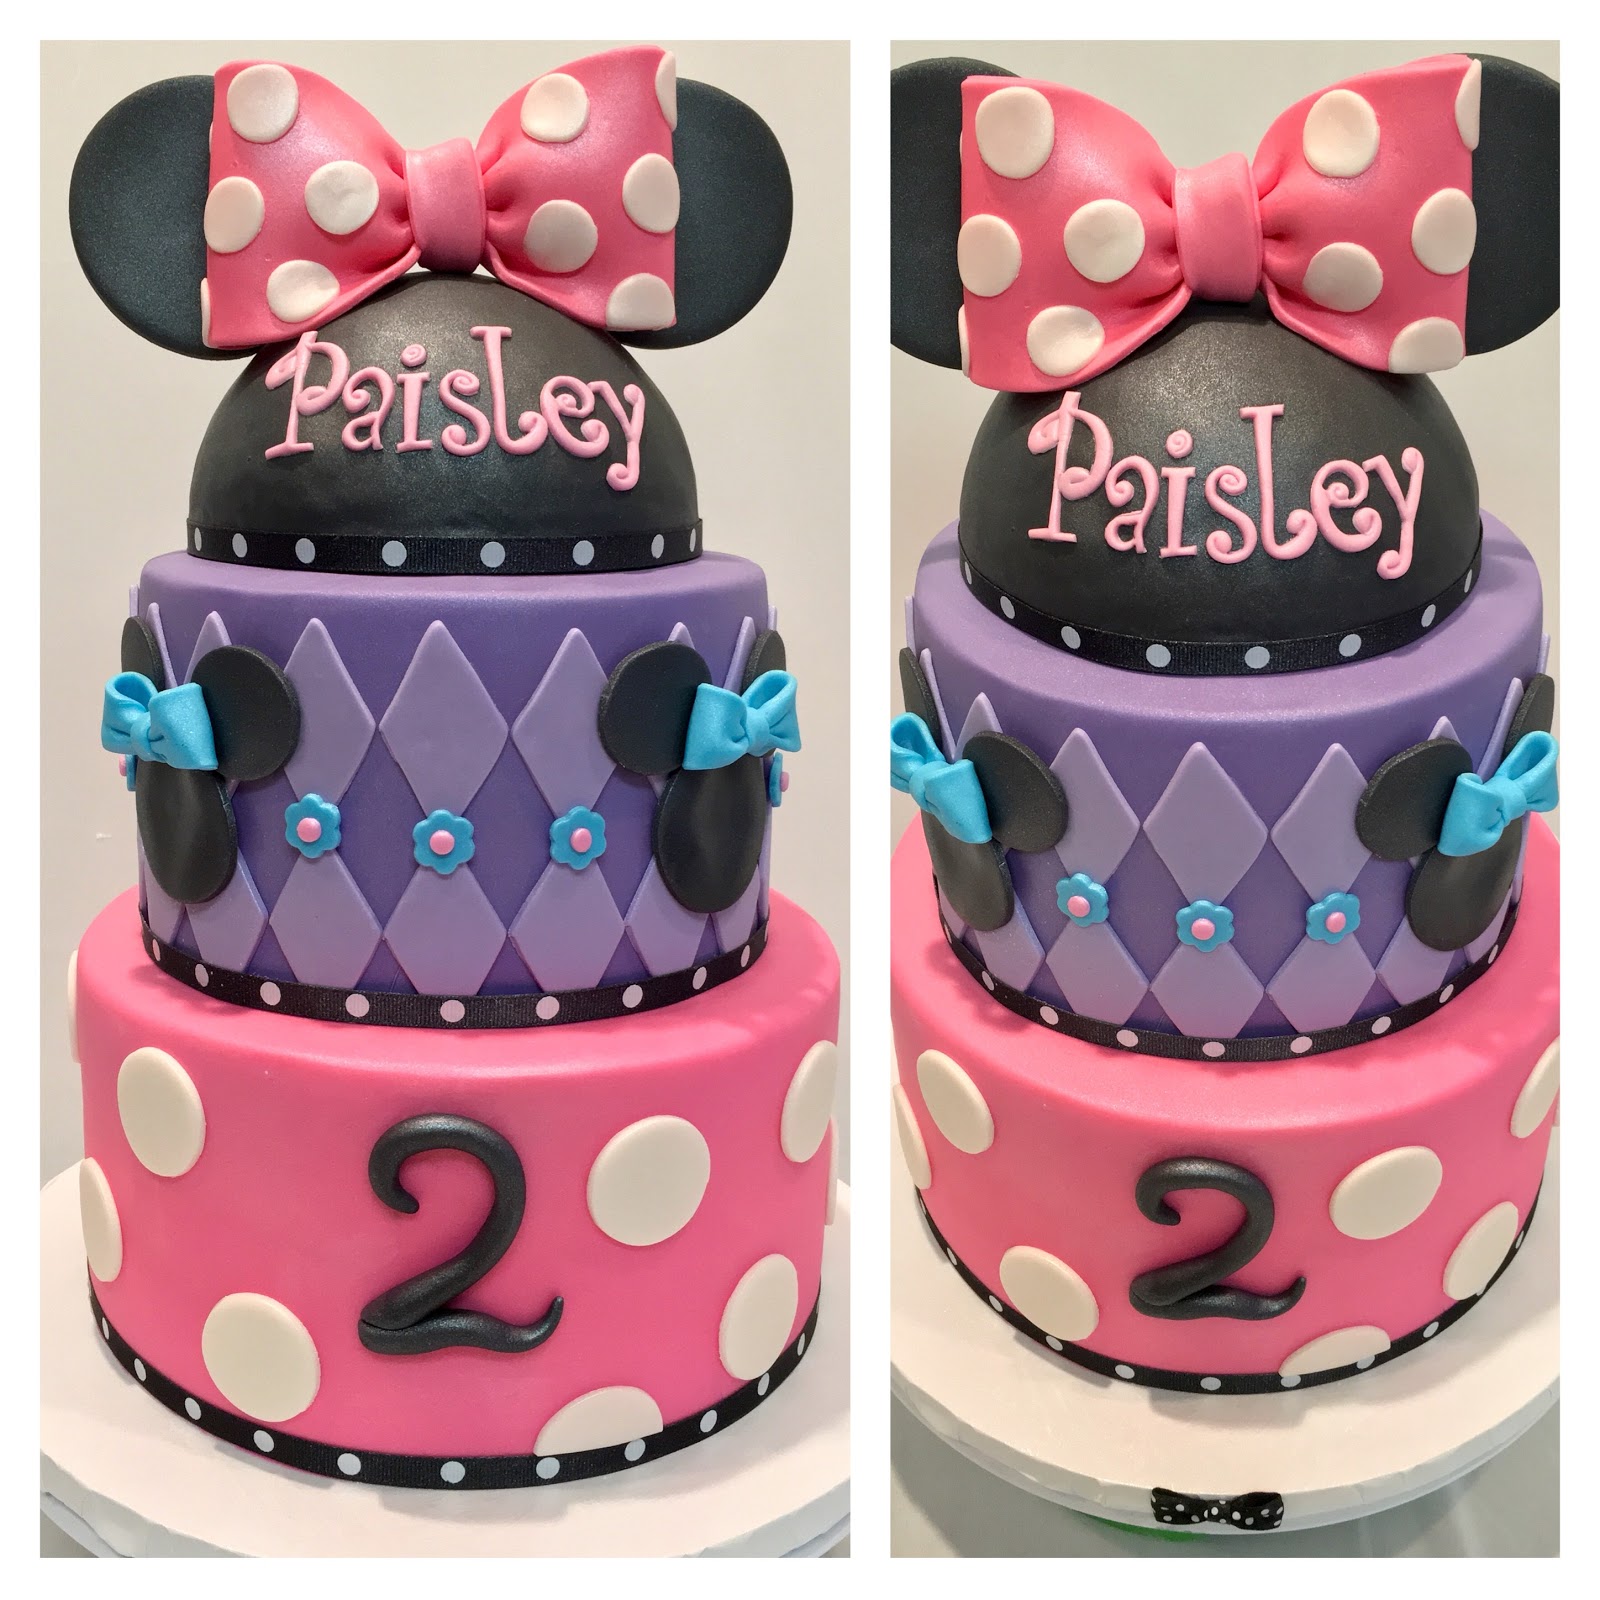 MyMoniCakes: Minnie Mouse cake with fondant ear topper and bow